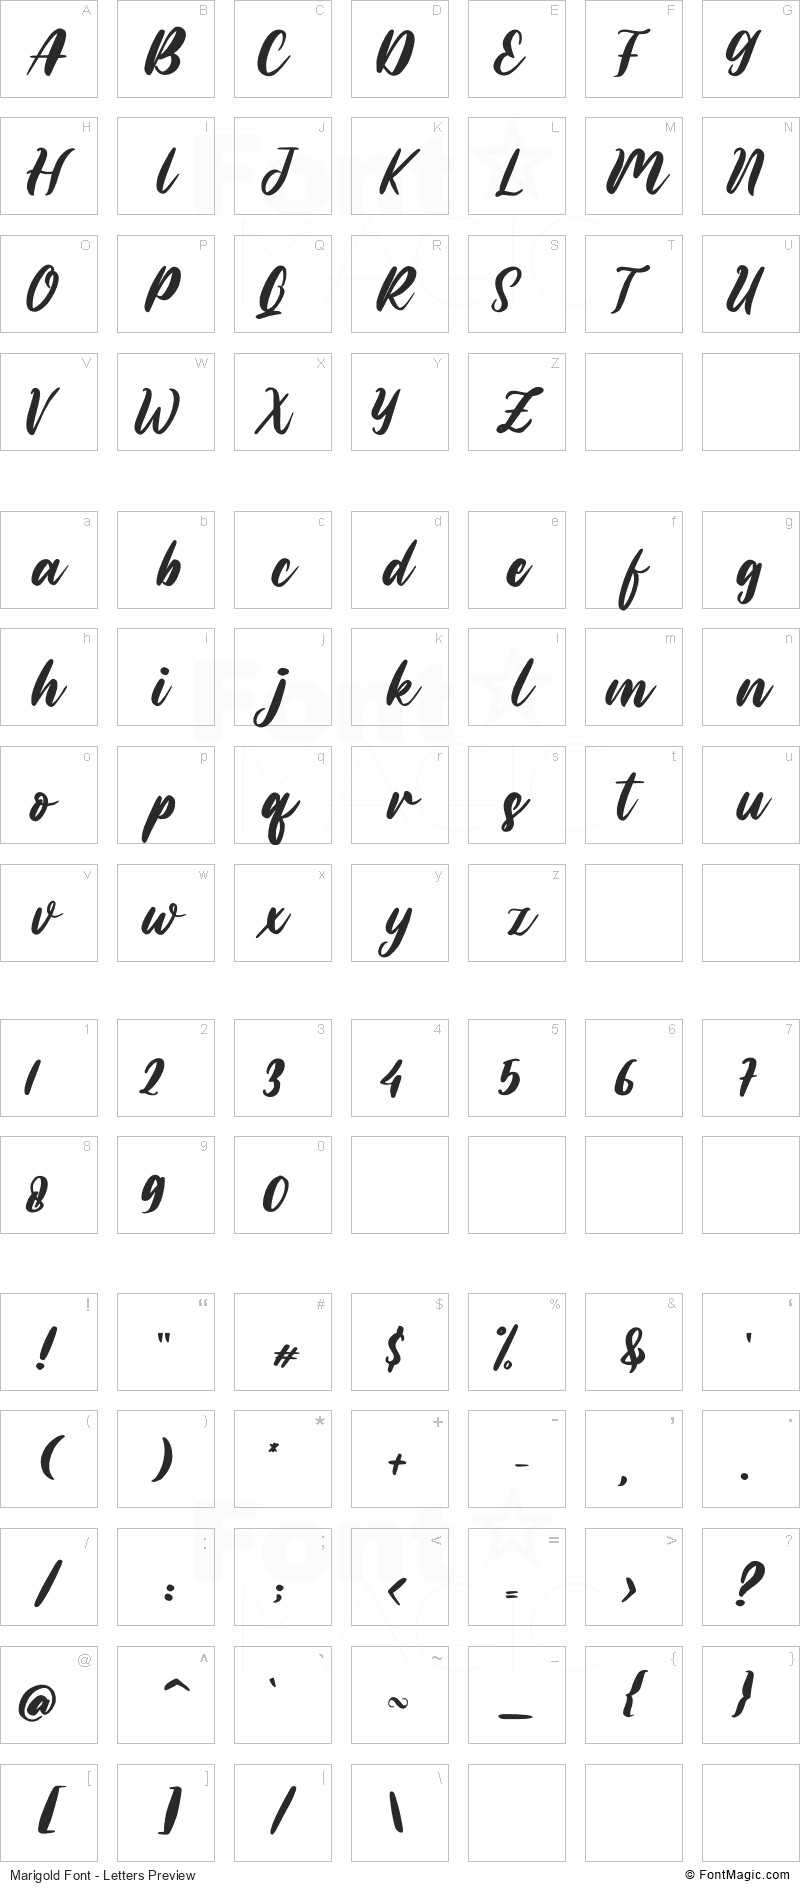 Marigold Font - All Latters Preview Chart